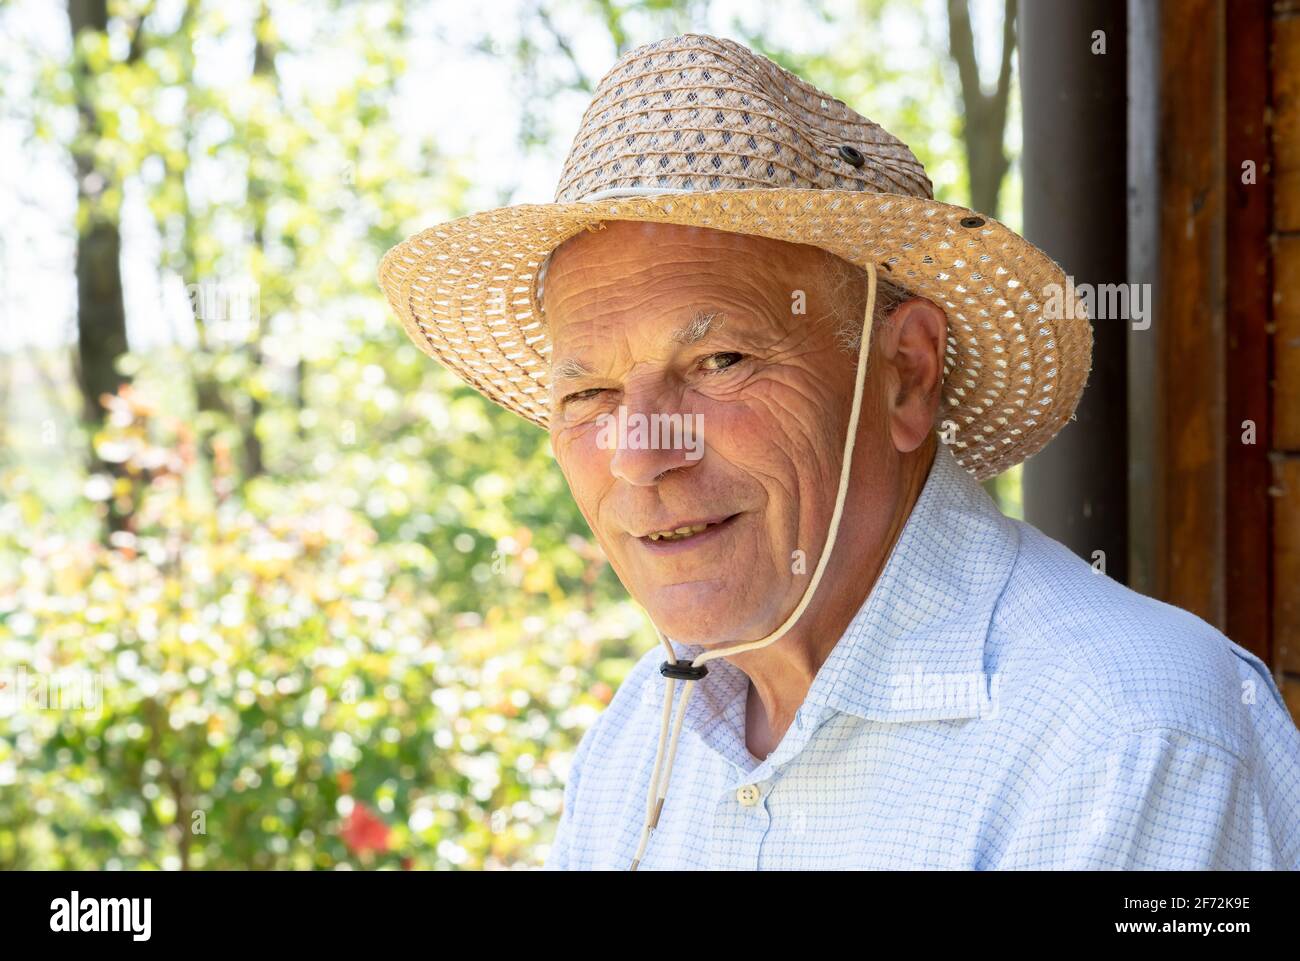 Portrait of elderly smiling man with straw hat looking at the cam. Elderly people lifestyle Stock Photo